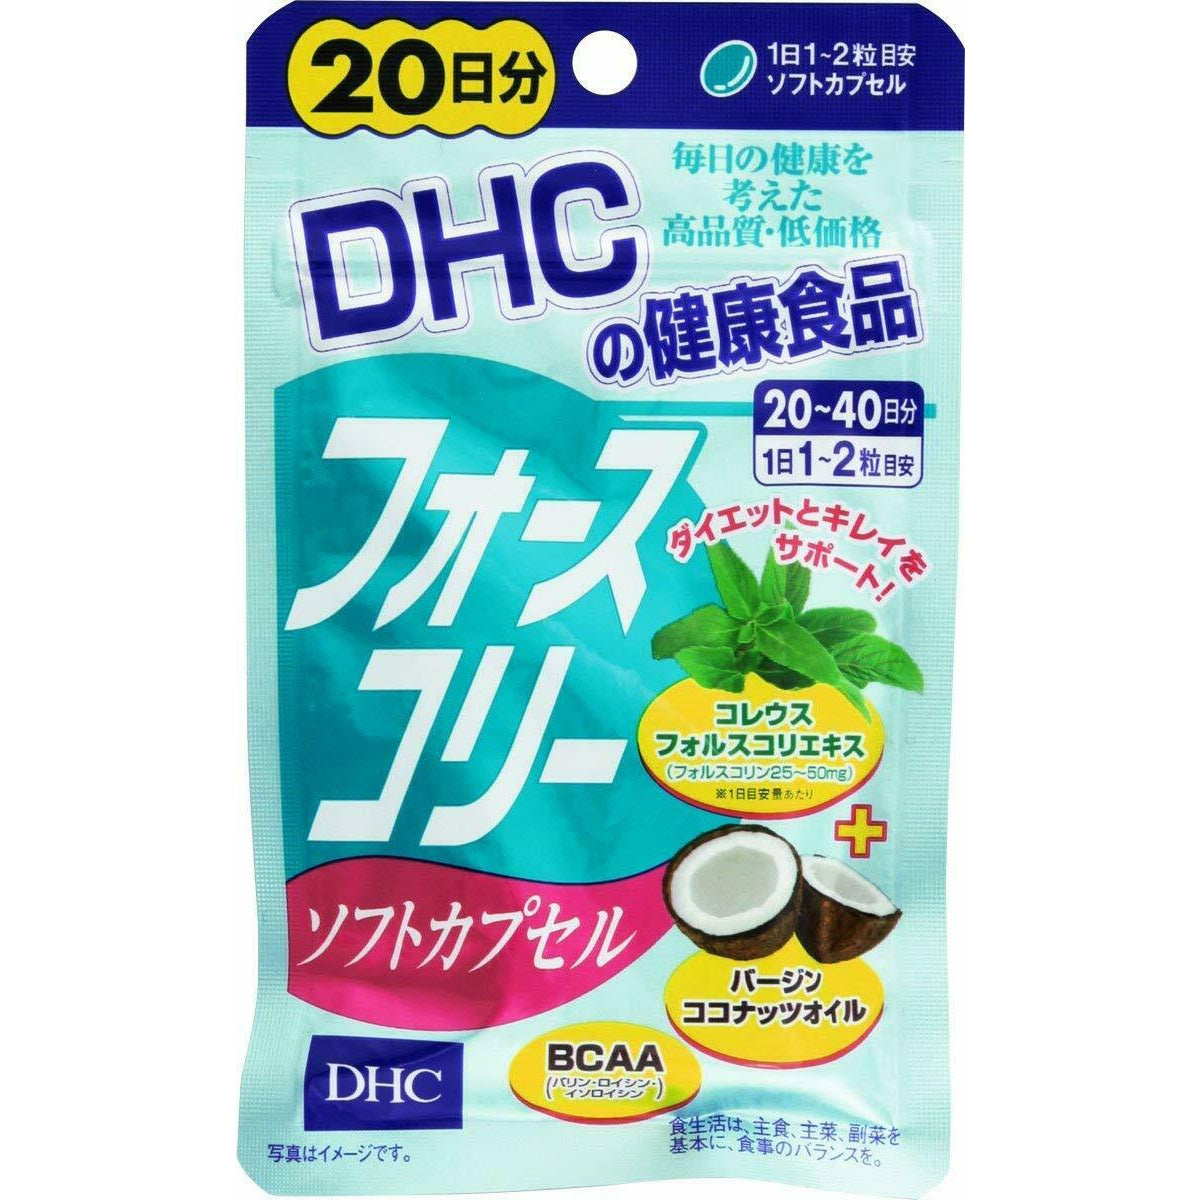 DHC Forskolin Supplements / Diet / Weight loss [20 days] 40 soft capsules